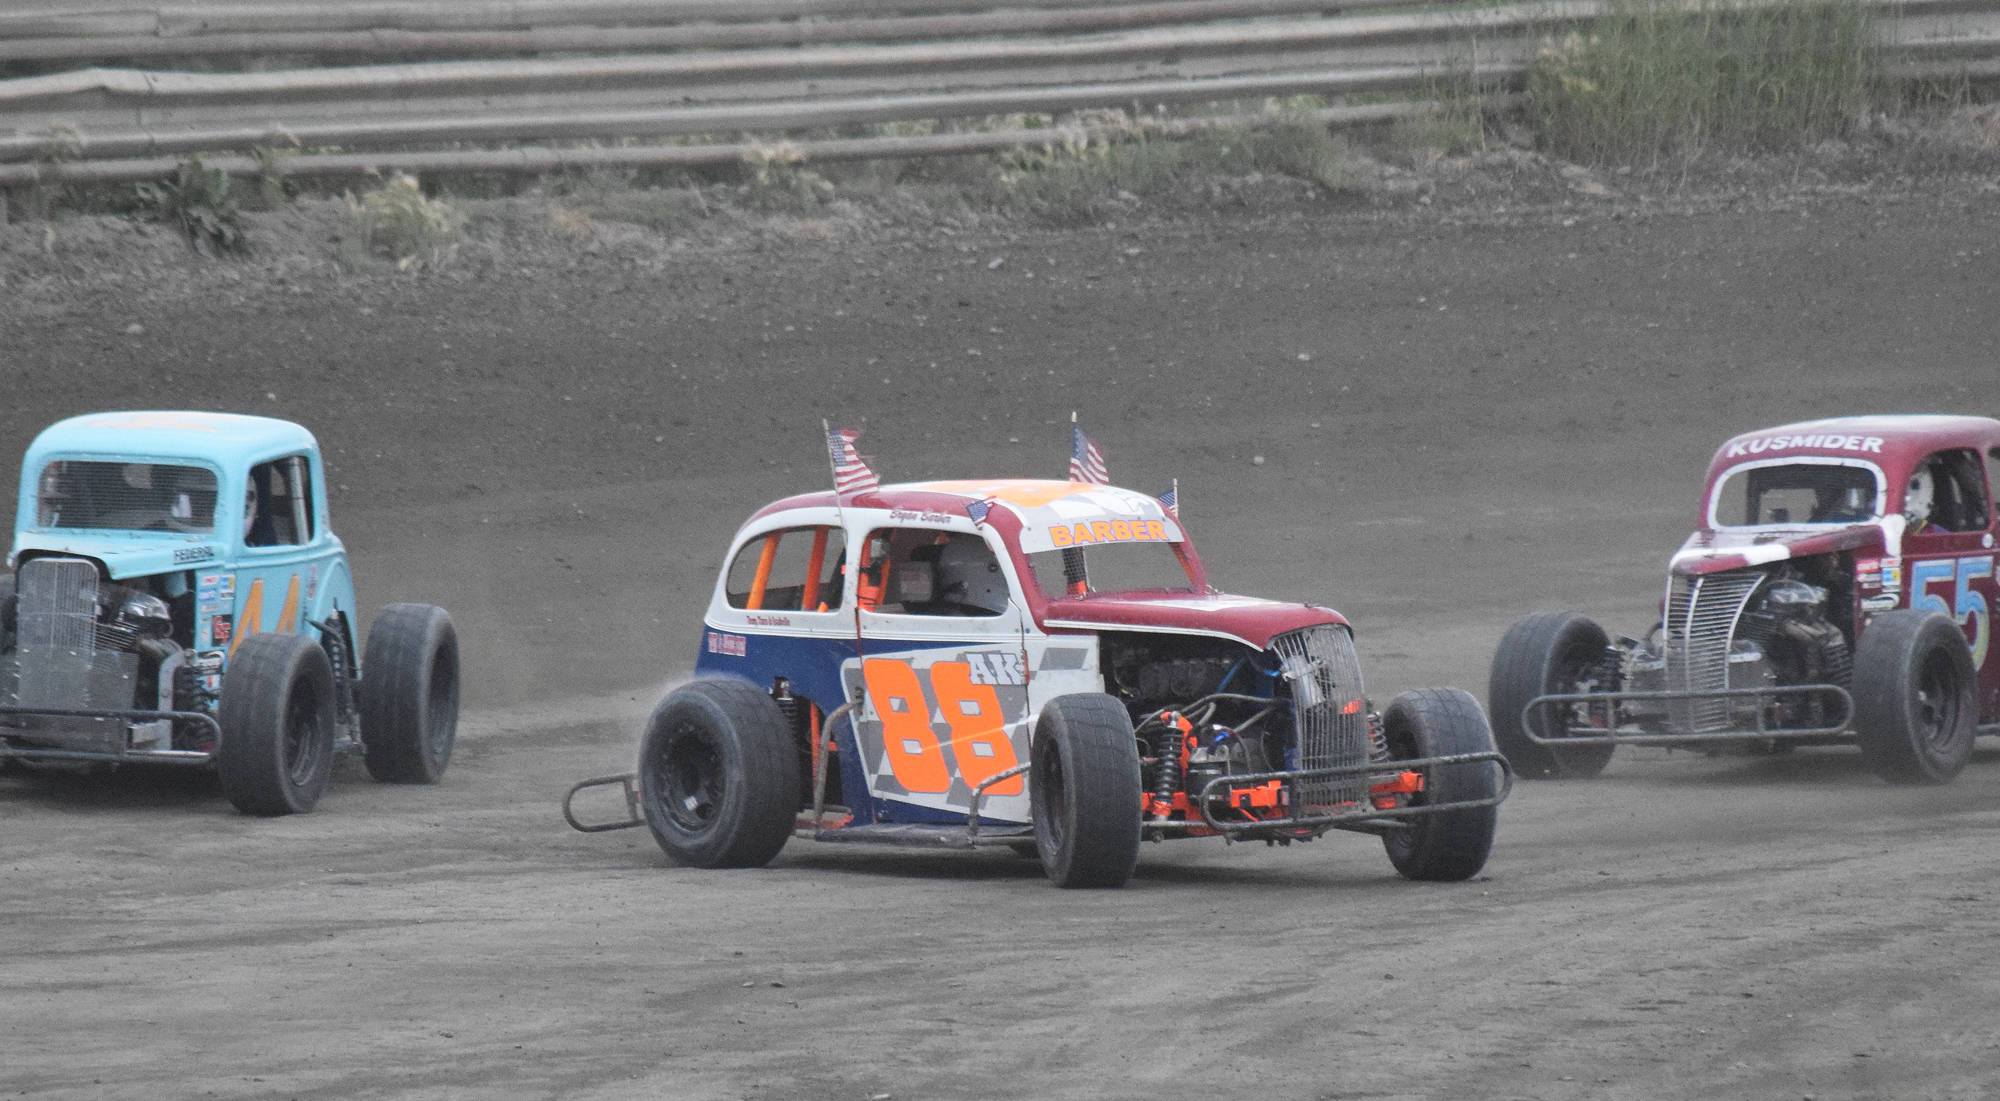 Bryan Barber (88) spins out in front of the field Saturday, July 13, 2019, early in the Legends feature race at Twin City Raceway in Kenai, Alaska. (Photo by Joey Klecka/Peninsula Clarion)